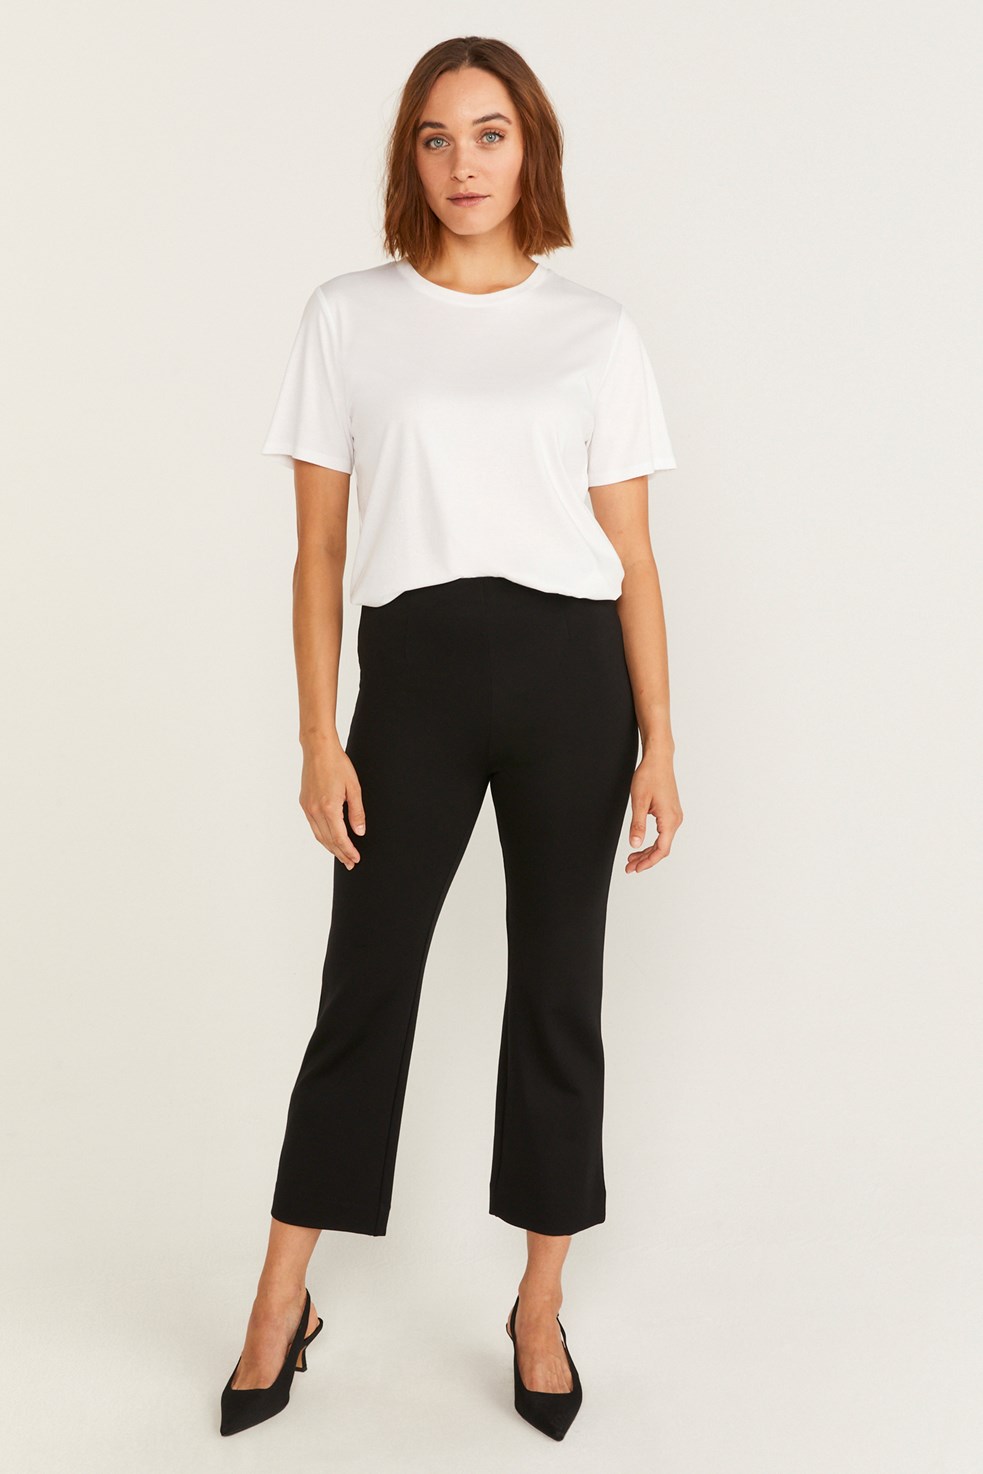 Stockh lm Studio Hannah Jersey Trousers Black | MQ Marqet